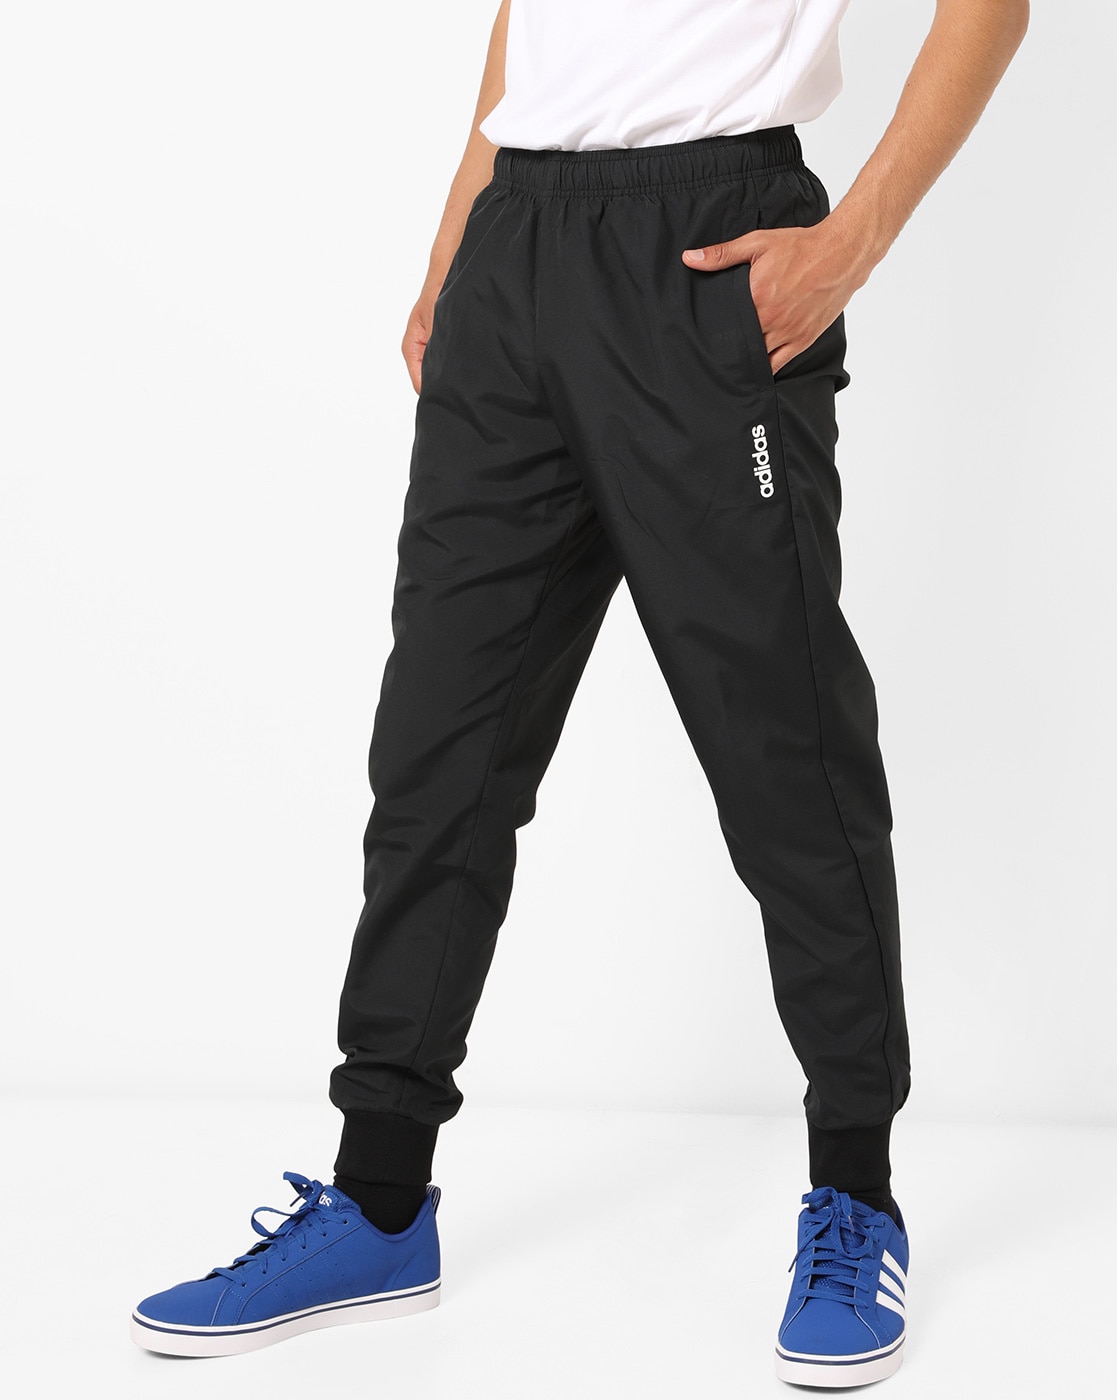 where can i buy adidas joggers